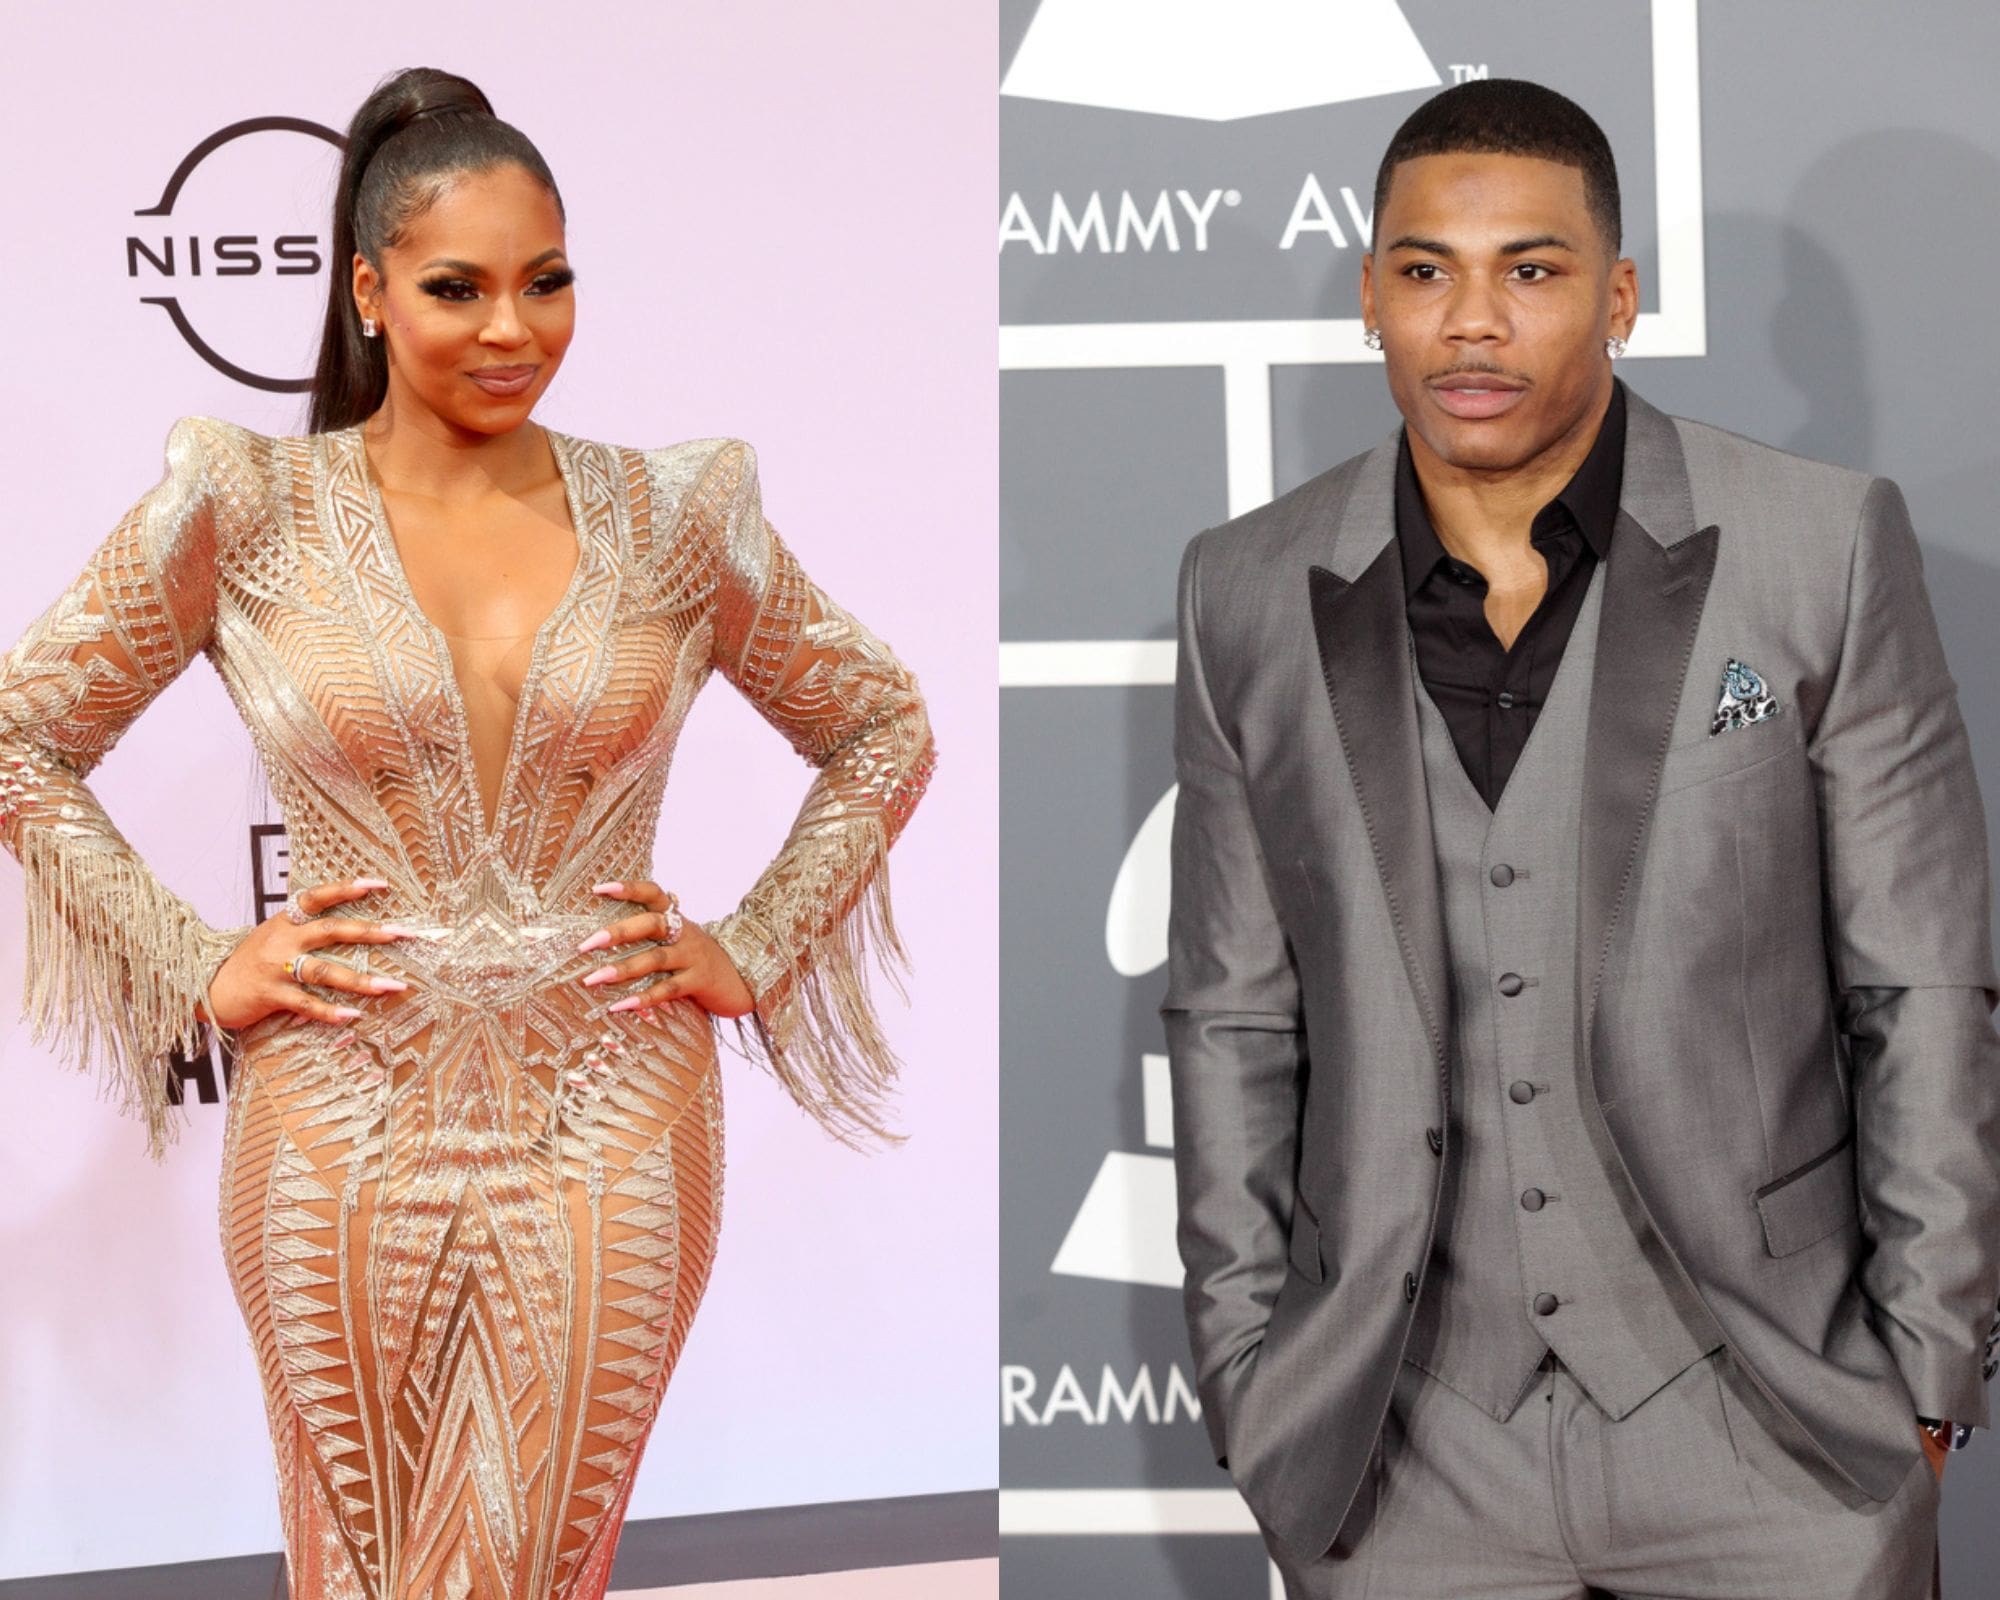 Ashanti Announces Pregnancy and Engagement with Nelly